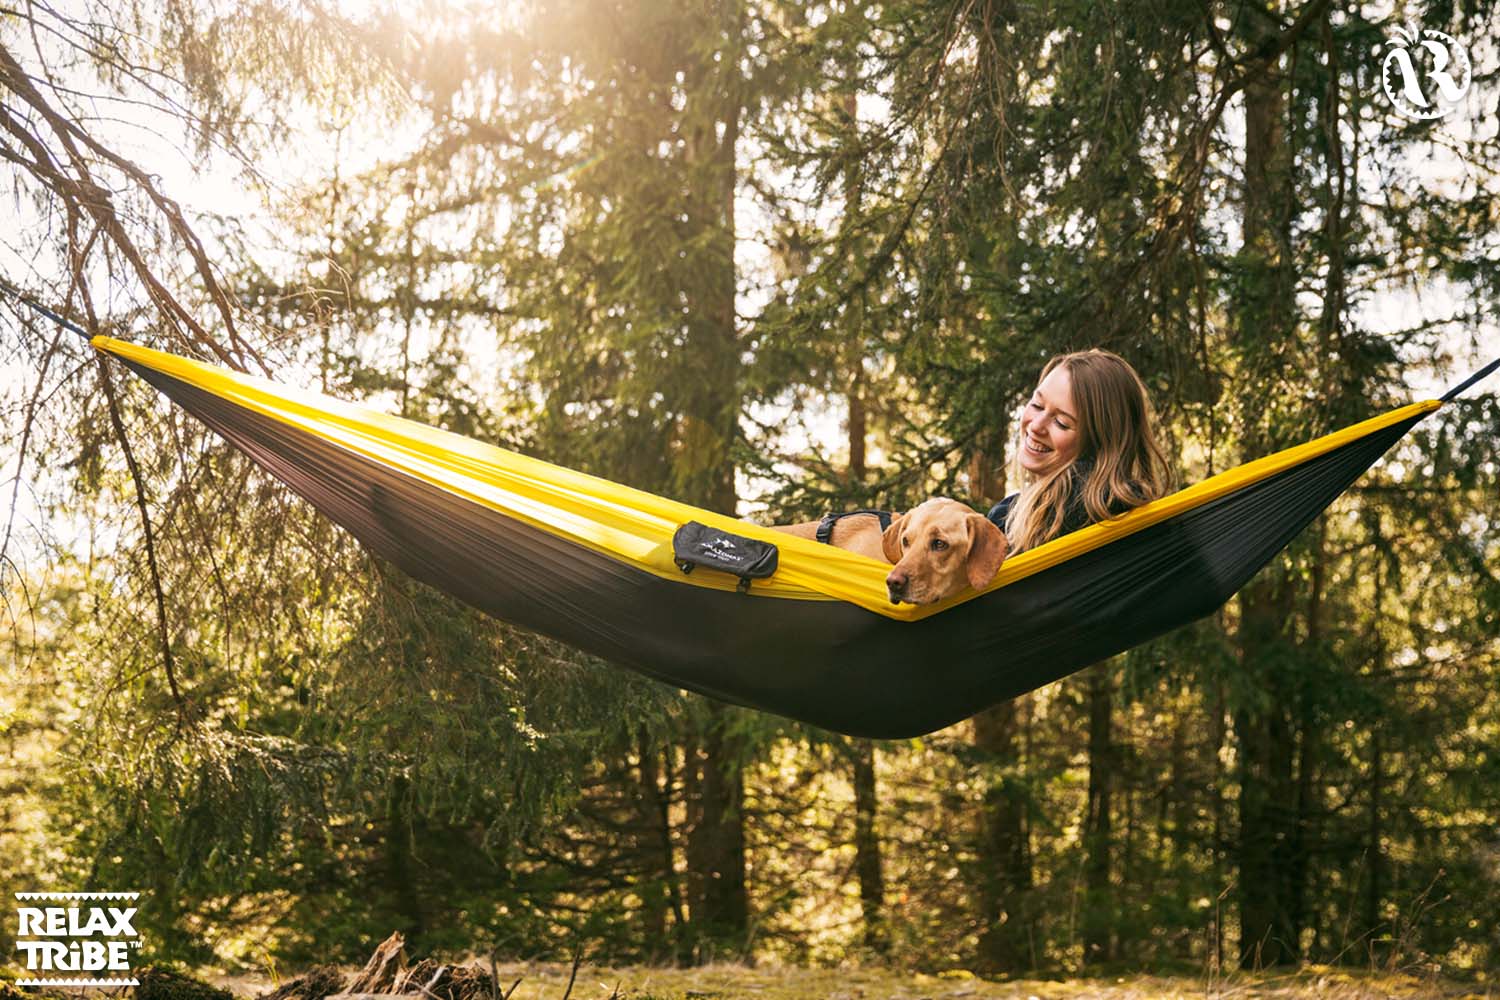 adventure-yellowstone-single-portable-travel-hammock-outdoor-camping-black-yellow-forest-trees